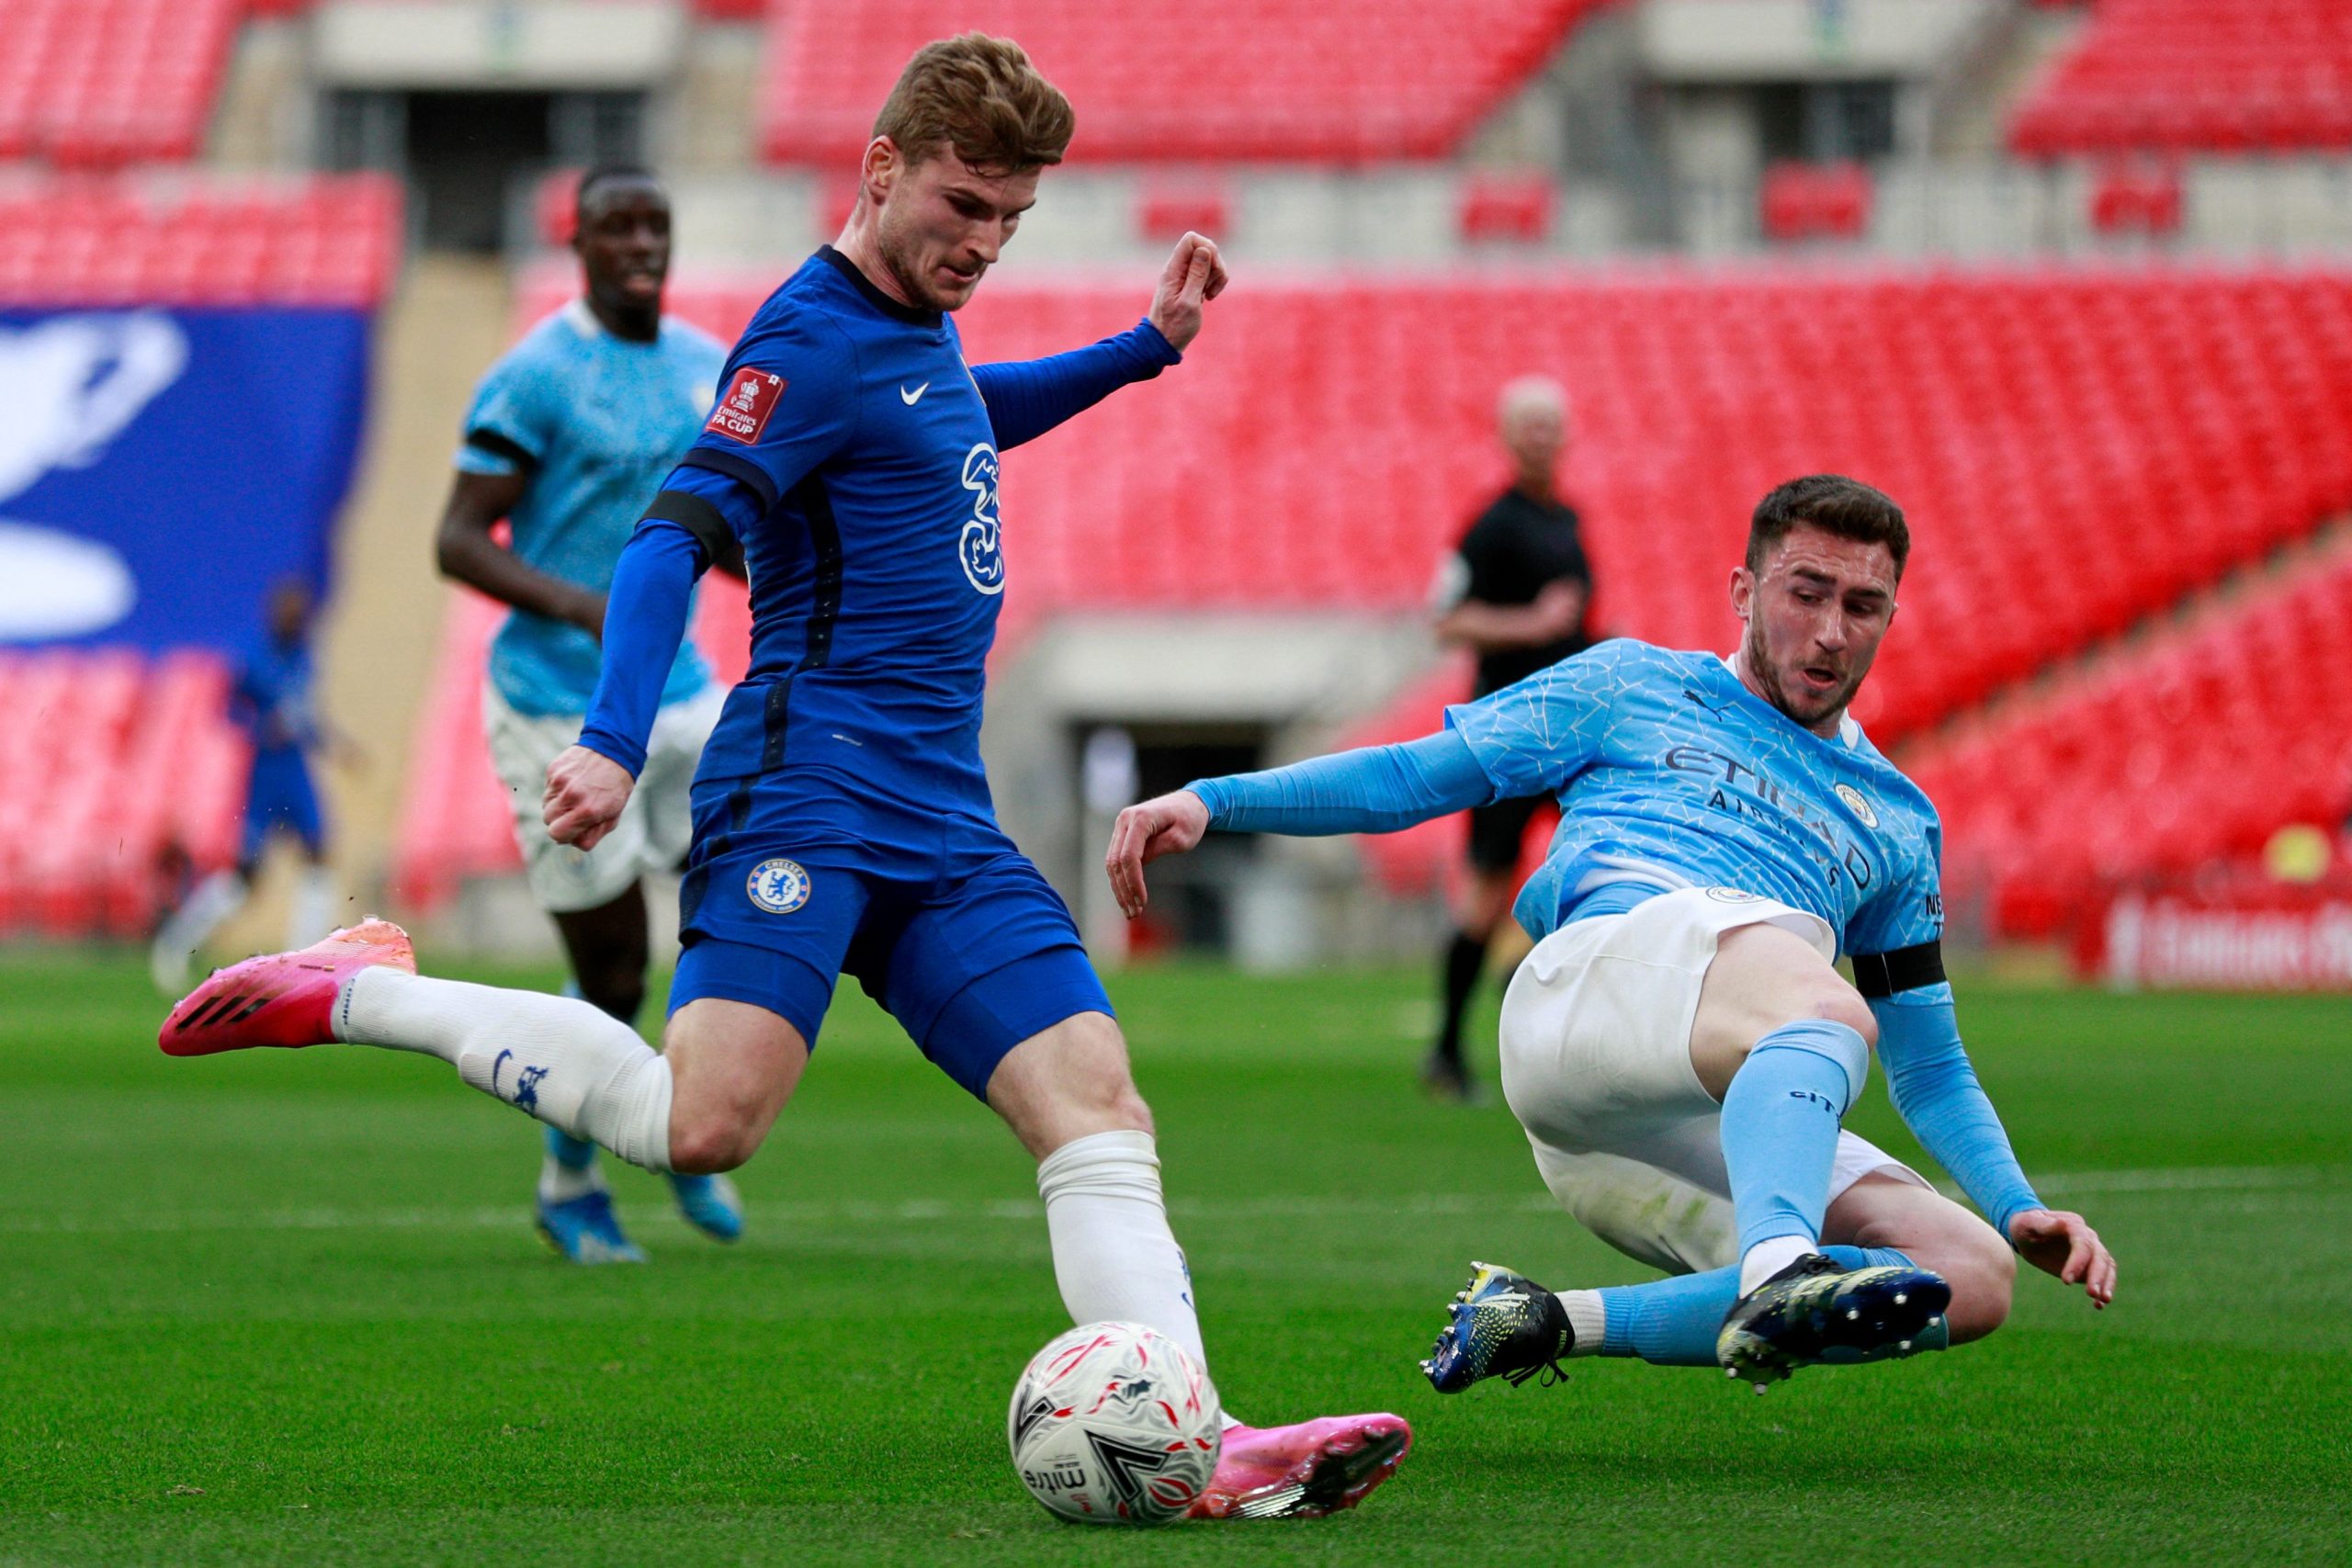 Chelsea's German striker Timo Werner (L) vies for possession with Manchester City's Aymeric Laporte.